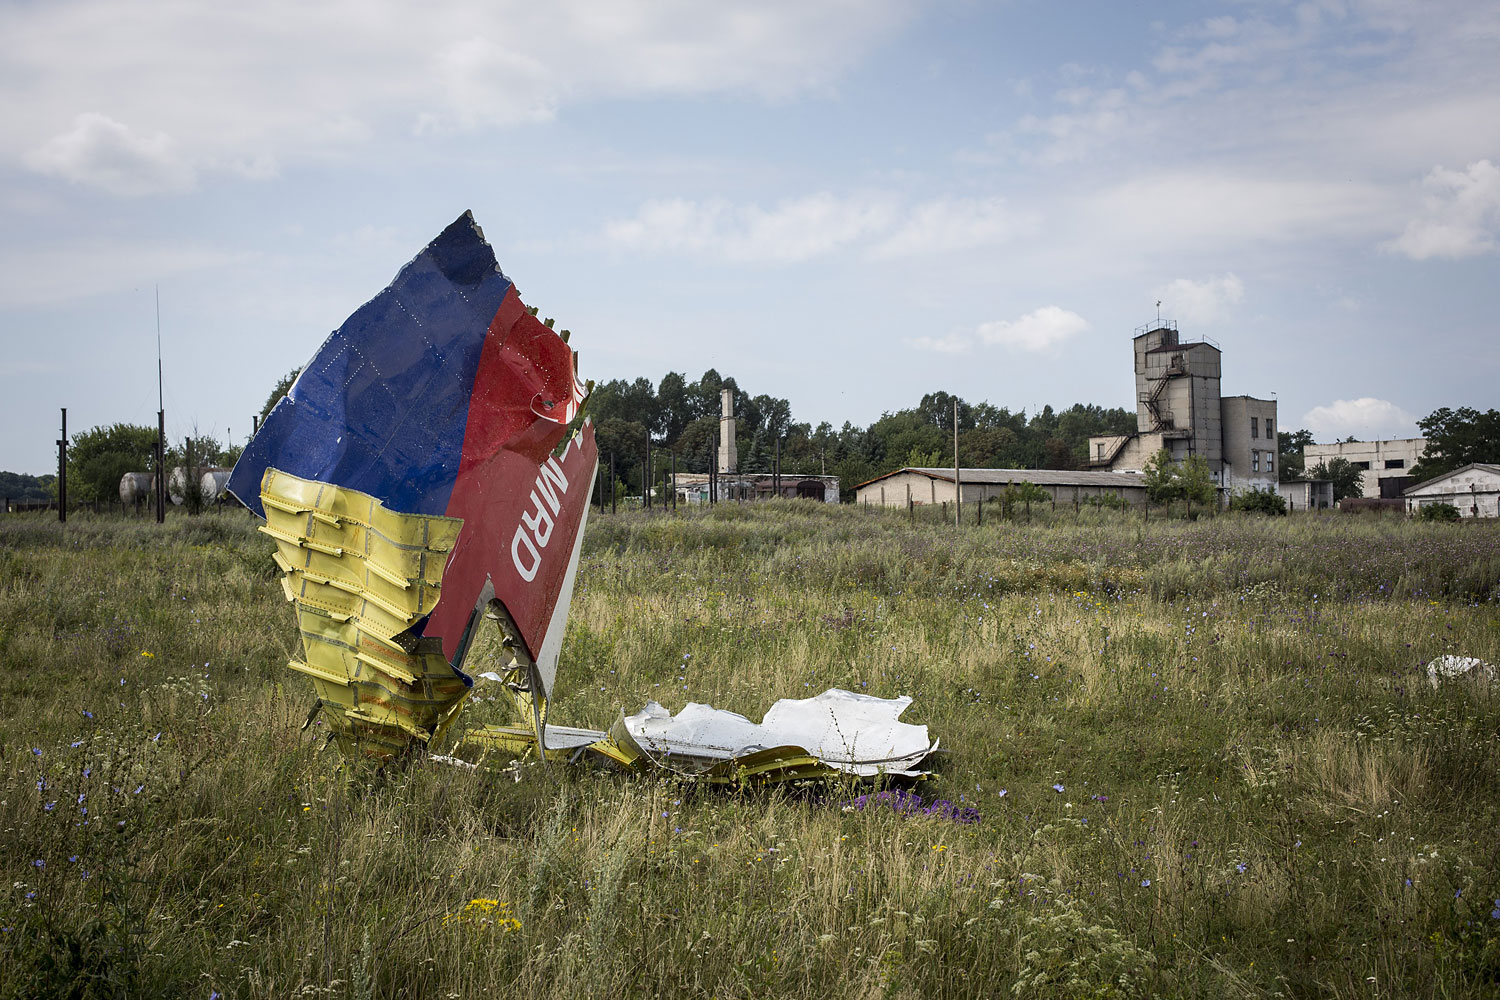 Wreckage from Malaysia Airlines Flight MH17 lies in a field in Grabovo, Ukraine, on July 22, 2014 (Rob Stothard—Getty Images)